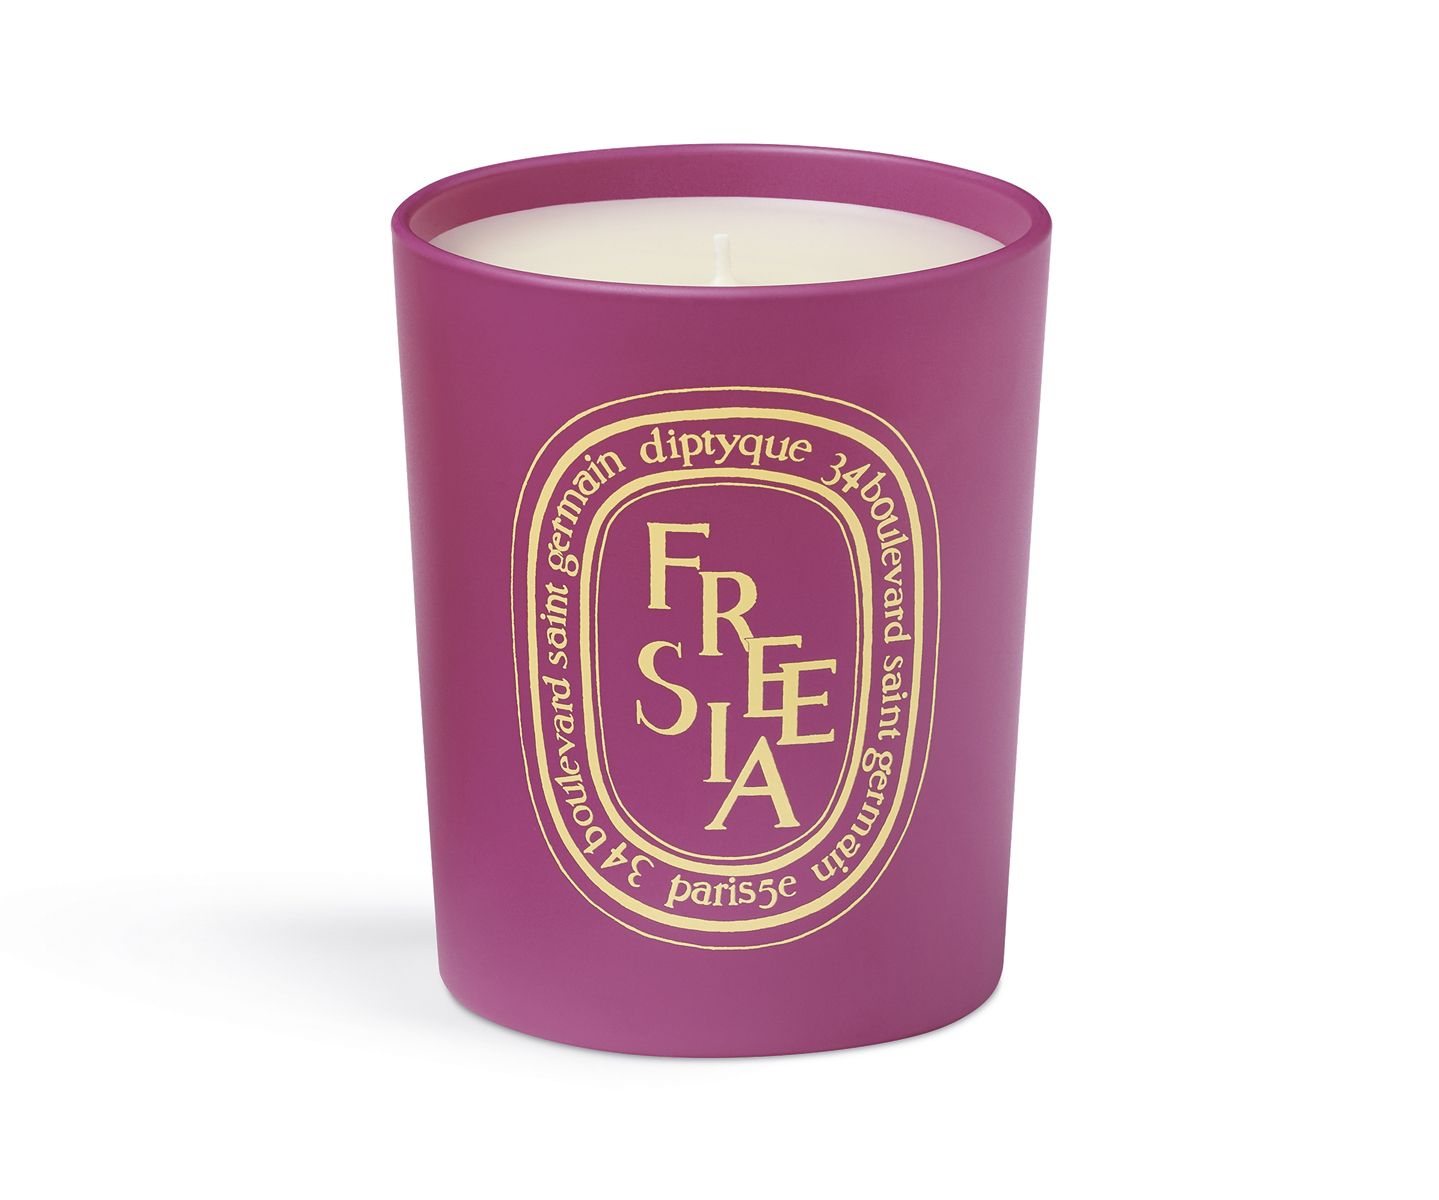 Freesia candle Limited Edition 190g | Diptyque (UK)